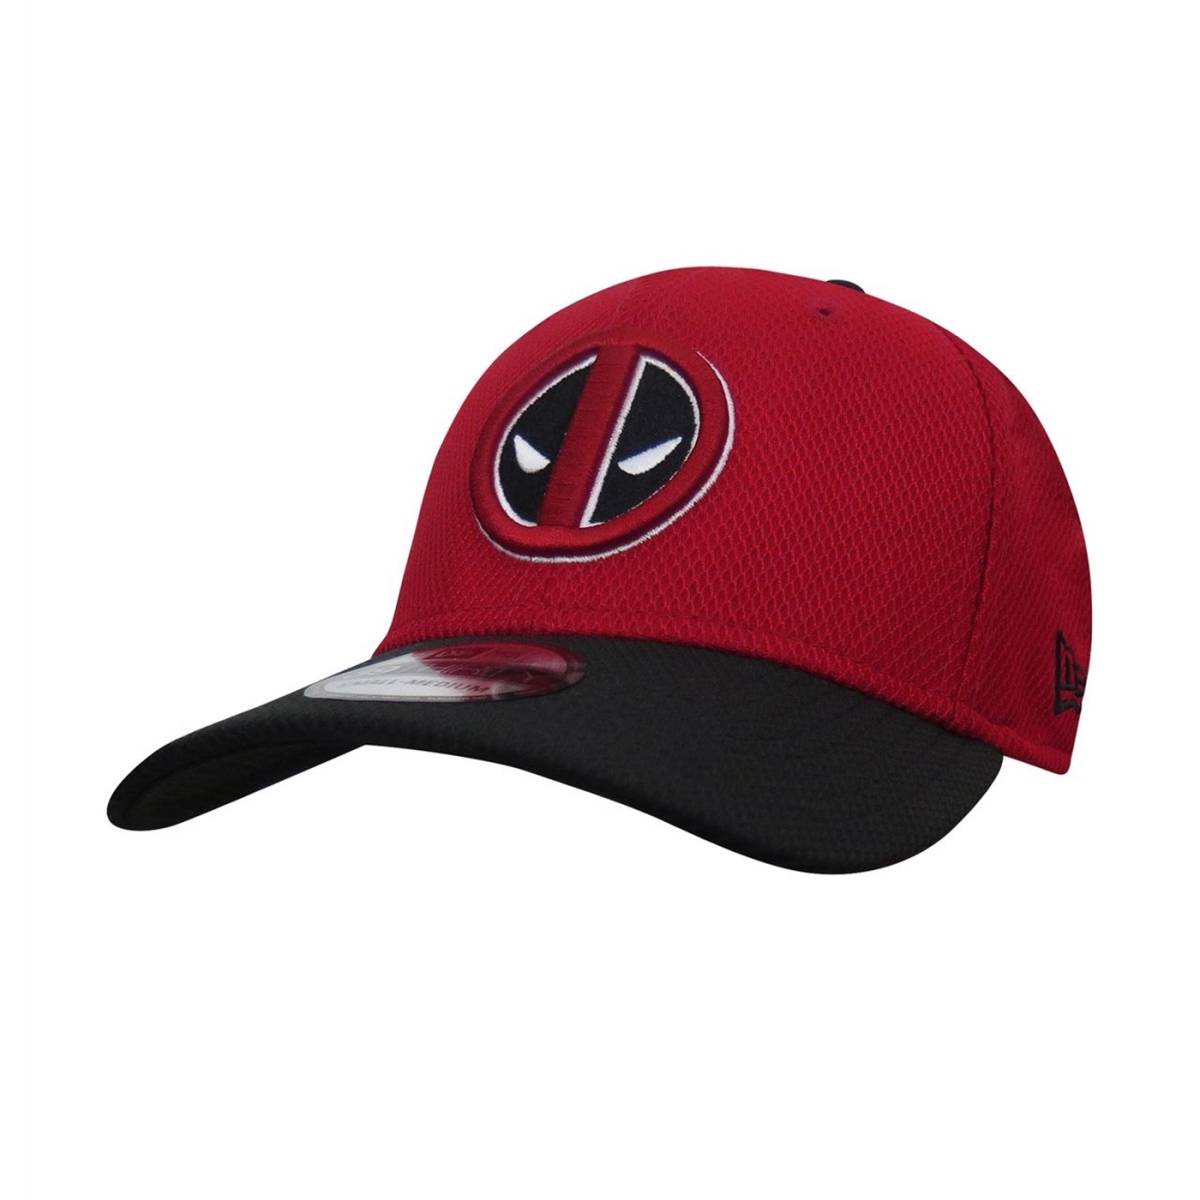 Picture of Deadpool capdprbsym39thirty-s-m-Small-Medium Deadpool Symbol Red & Black 39 Thirty Fitted Hat - Small & Medium